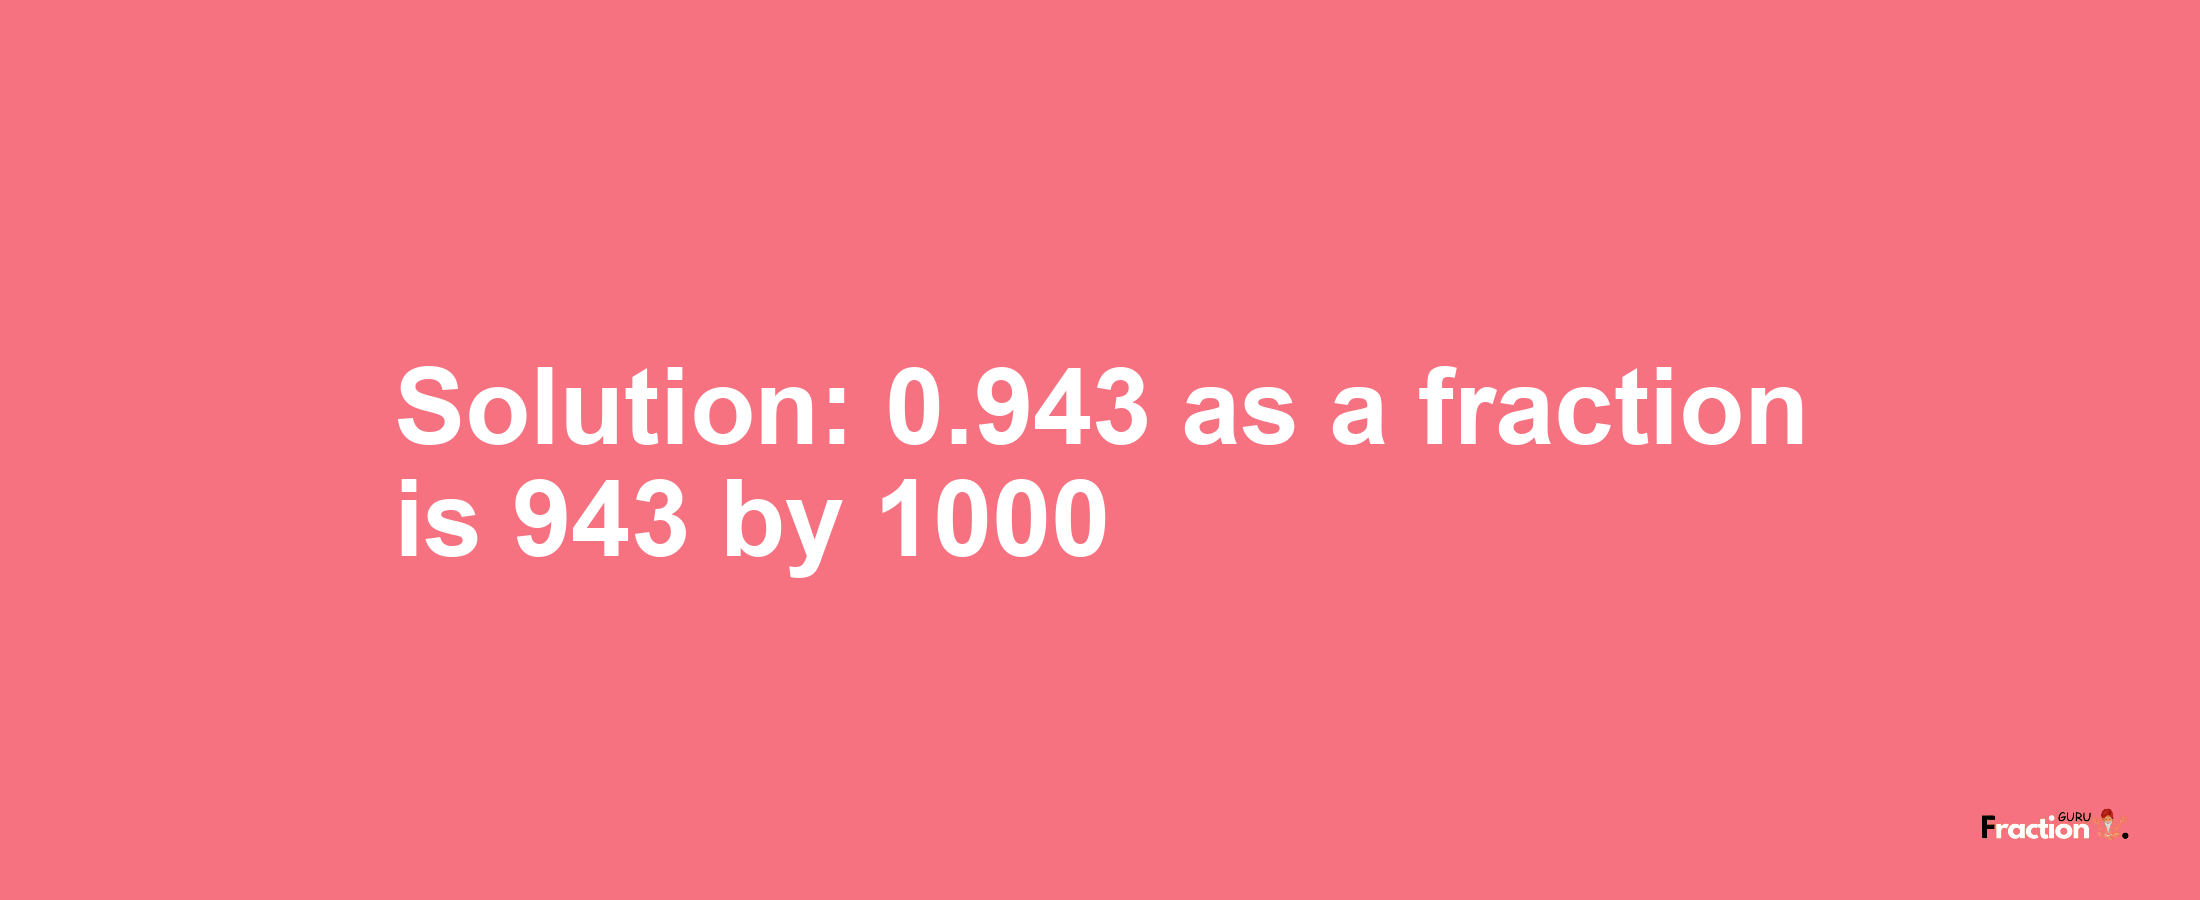 Solution:0.943 as a fraction is 943/1000